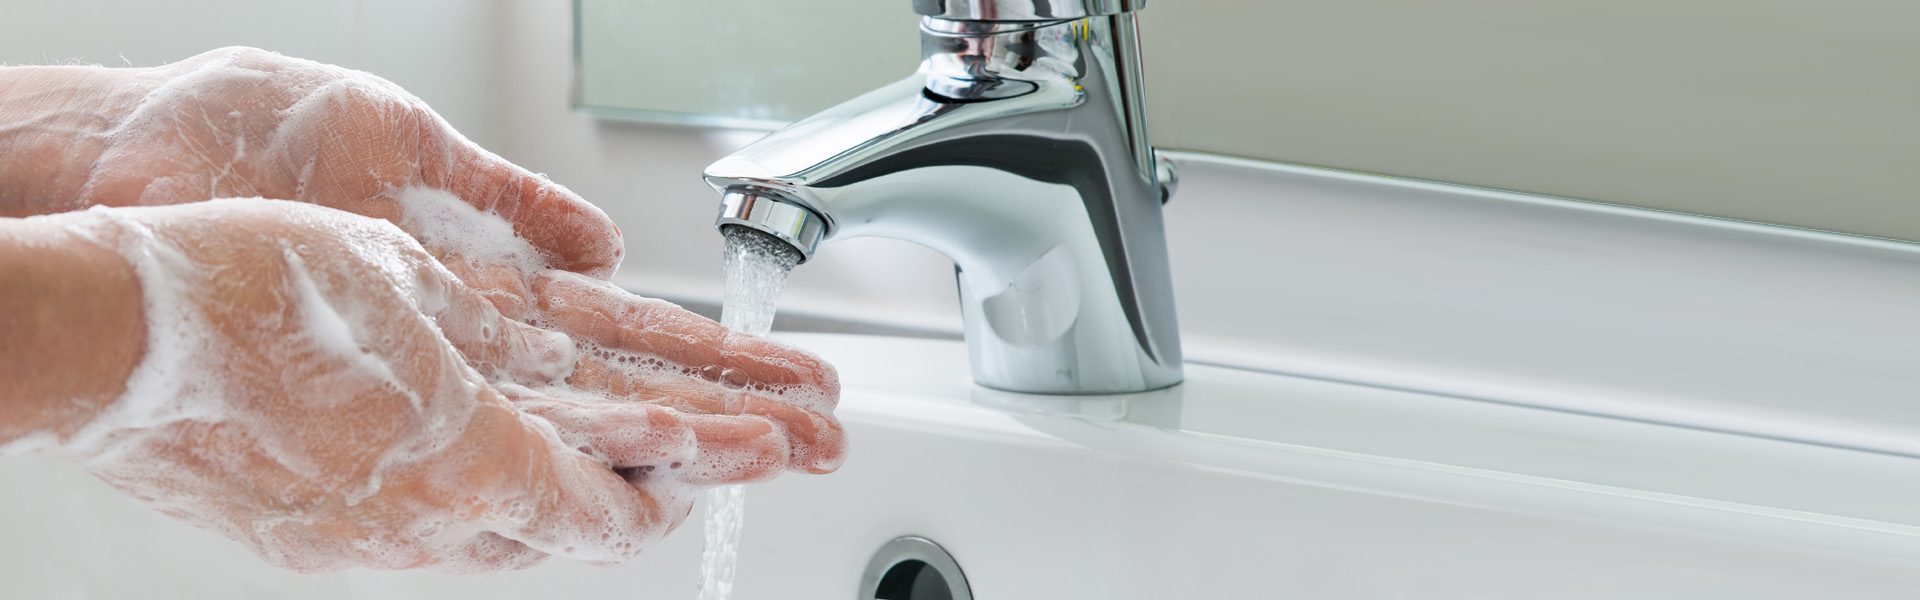 hand washing ways to prevent common cold